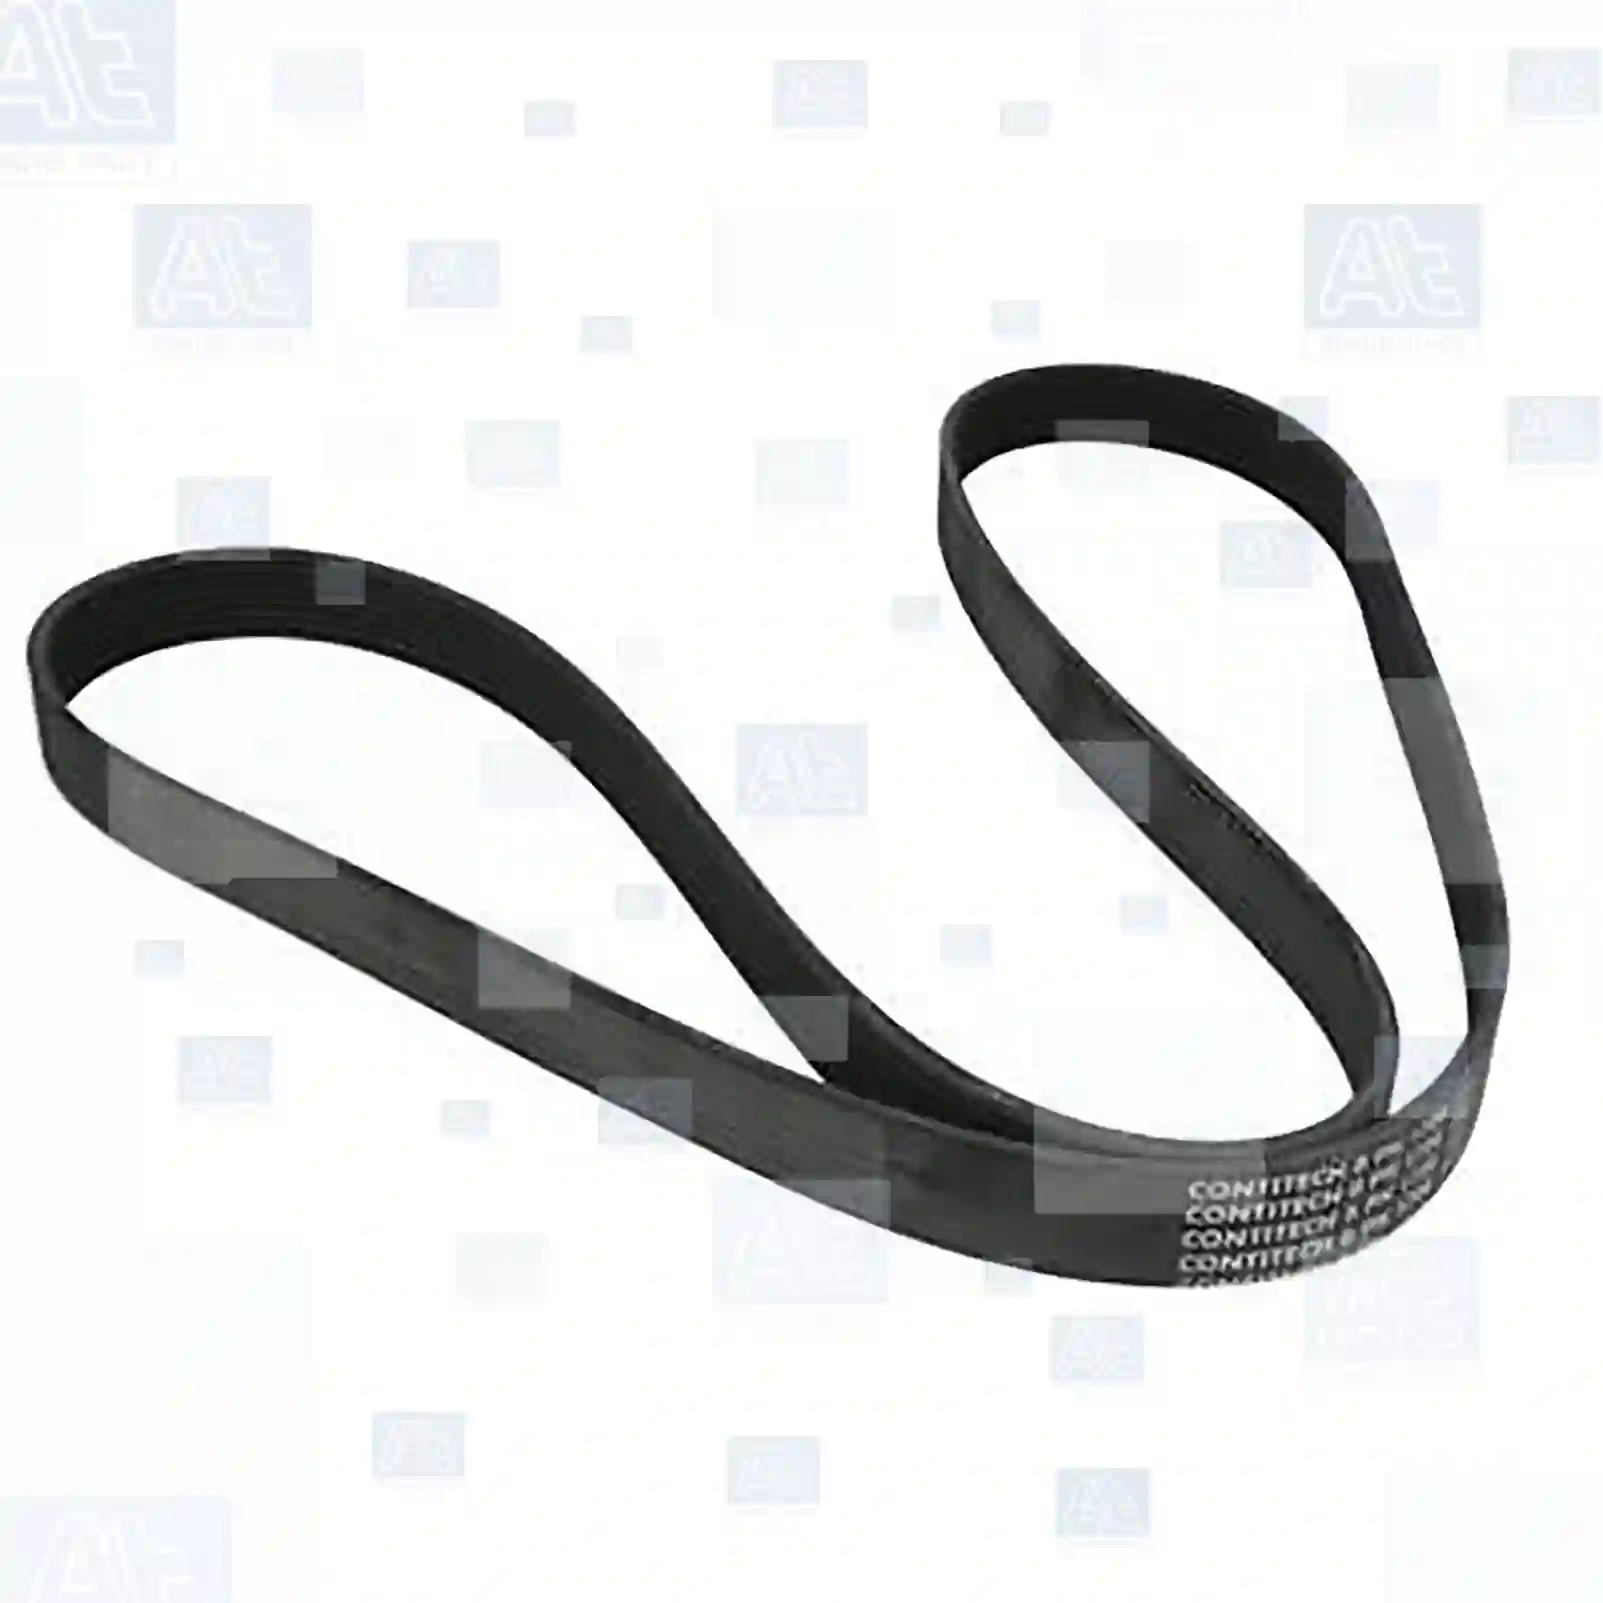 Multiribbed belt, 77708449, 46444537, 46769821, 46787906, 51855784, 55186364, 55189684, 55201362, 60813720, 71734715, 71734716, 71739910, 71749452, 037145933A, 037145933C, 047903137AB, 074145933AR, 078903137AP, 078903137BH, 078903137BM, 6Q0260849C, PQS10061, 11287794248, 4892519AB, 53010010, 5750GF, 5750GK, 5750GL, 5750HG, 5750HH, 5750R9, 5750S0, 5750T7, 5750T8, 5750VS, 5750VX, 5750X3, 5750XS, 9633010980, 9642574680, 9644351580, 9652258880, 9652746780, 4891974AC, 07310606, 55189686, 71734716, 71739923, 71739924, 71749452, 9629054080, 9638464180, 9638464380, 9644846680, 96225213, 96242337, 96284665, 96290540, 96313338, 96324103, 96324104, 1007485, 1011193, 1036917, 1427353, 1494787, 92062955, 37330-29100, 37330-29102, 4891974AC, 4892519AA, 53010010, 53010283, 07310606, 46444537, 46479557, 46769821, 46787907, 60816660, 71734716, 71749452, 9629054080, 9630796180, 9631333880, 9632410380, 9638464380, 9644846680, 96188881, 96324103, GFB101750, LR000996, PQS10061, 1E0315907, 1E0315907A, 1E0315907B, 1E0515907, 96FB6C301BC, 96MF6C301BC, 4451A060, 5750GF, 5750GK, 5750GL, 5750HG, 5750HH, 5750R9, 5750S0, 5750T7, 5750T8, 5750VS, 5750VX, 5750X3, 5750XS, 9633010980, 9642574680, 9644351580, 9652258880, 9652746780, 0000107175, 5000679653, 5000693140, PQS10061, 047903137AB, 074145933AR, 6Q0260849A, 03D145933A, 047903137AB, 074145933AR, 6Q0260849A, 6Q0260849C, 49180-65G10, 91829229, 9186352, 9434341, 037145933A, 037145933C, 03D145933A, 047903137AB, 074145933AD, 074145933AR, 6Q0260849, 74145933AD, 74145933AR, 78903137AP ||  77708449 At Spare Part | Engine, Accelerator Pedal, Camshaft, Connecting Rod, Crankcase, Crankshaft, Cylinder Head, Engine Suspension Mountings, Exhaust Manifold, Exhaust Gas Recirculation, Filter Kits, Flywheel Housing, General Overhaul Kits, Engine, Intake Manifold, Oil Cleaner, Oil Cooler, Oil Filter, Oil Pump, Oil Sump, Piston & Liner, Sensor & Switch, Timing Case, Turbocharger, Cooling System, Belt Tensioner, Coolant Filter, Coolant Pipe, Corrosion Prevention Agent, Drive, Expansion Tank, Fan, Intercooler, Monitors & Gauges, Radiator, Thermostat, V-Belt / Timing belt, Water Pump, Fuel System, Electronical Injector Unit, Feed Pump, Fuel Filter, cpl., Fuel Gauge Sender,  Fuel Line, Fuel Pump, Fuel Tank, Injection Line Kit, Injection Pump, Exhaust System, Clutch & Pedal, Gearbox, Propeller Shaft, Axles, Brake System, Hubs & Wheels, Suspension, Leaf Spring, Universal Parts / Accessories, Steering, Electrical System, Cabin Multiribbed belt, 77708449, 46444537, 46769821, 46787906, 51855784, 55186364, 55189684, 55201362, 60813720, 71734715, 71734716, 71739910, 71749452, 037145933A, 037145933C, 047903137AB, 074145933AR, 078903137AP, 078903137BH, 078903137BM, 6Q0260849C, PQS10061, 11287794248, 4892519AB, 53010010, 5750GF, 5750GK, 5750GL, 5750HG, 5750HH, 5750R9, 5750S0, 5750T7, 5750T8, 5750VS, 5750VX, 5750X3, 5750XS, 9633010980, 9642574680, 9644351580, 9652258880, 9652746780, 4891974AC, 07310606, 55189686, 71734716, 71739923, 71739924, 71749452, 9629054080, 9638464180, 9638464380, 9644846680, 96225213, 96242337, 96284665, 96290540, 96313338, 96324103, 96324104, 1007485, 1011193, 1036917, 1427353, 1494787, 92062955, 37330-29100, 37330-29102, 4891974AC, 4892519AA, 53010010, 53010283, 07310606, 46444537, 46479557, 46769821, 46787907, 60816660, 71734716, 71749452, 9629054080, 9630796180, 9631333880, 9632410380, 9638464380, 9644846680, 96188881, 96324103, GFB101750, LR000996, PQS10061, 1E0315907, 1E0315907A, 1E0315907B, 1E0515907, 96FB6C301BC, 96MF6C301BC, 4451A060, 5750GF, 5750GK, 5750GL, 5750HG, 5750HH, 5750R9, 5750S0, 5750T7, 5750T8, 5750VS, 5750VX, 5750X3, 5750XS, 9633010980, 9642574680, 9644351580, 9652258880, 9652746780, 0000107175, 5000679653, 5000693140, PQS10061, 047903137AB, 074145933AR, 6Q0260849A, 03D145933A, 047903137AB, 074145933AR, 6Q0260849A, 6Q0260849C, 49180-65G10, 91829229, 9186352, 9434341, 037145933A, 037145933C, 03D145933A, 047903137AB, 074145933AD, 074145933AR, 6Q0260849, 74145933AD, 74145933AR, 78903137AP ||  77708449 At Spare Part | Engine, Accelerator Pedal, Camshaft, Connecting Rod, Crankcase, Crankshaft, Cylinder Head, Engine Suspension Mountings, Exhaust Manifold, Exhaust Gas Recirculation, Filter Kits, Flywheel Housing, General Overhaul Kits, Engine, Intake Manifold, Oil Cleaner, Oil Cooler, Oil Filter, Oil Pump, Oil Sump, Piston & Liner, Sensor & Switch, Timing Case, Turbocharger, Cooling System, Belt Tensioner, Coolant Filter, Coolant Pipe, Corrosion Prevention Agent, Drive, Expansion Tank, Fan, Intercooler, Monitors & Gauges, Radiator, Thermostat, V-Belt / Timing belt, Water Pump, Fuel System, Electronical Injector Unit, Feed Pump, Fuel Filter, cpl., Fuel Gauge Sender,  Fuel Line, Fuel Pump, Fuel Tank, Injection Line Kit, Injection Pump, Exhaust System, Clutch & Pedal, Gearbox, Propeller Shaft, Axles, Brake System, Hubs & Wheels, Suspension, Leaf Spring, Universal Parts / Accessories, Steering, Electrical System, Cabin